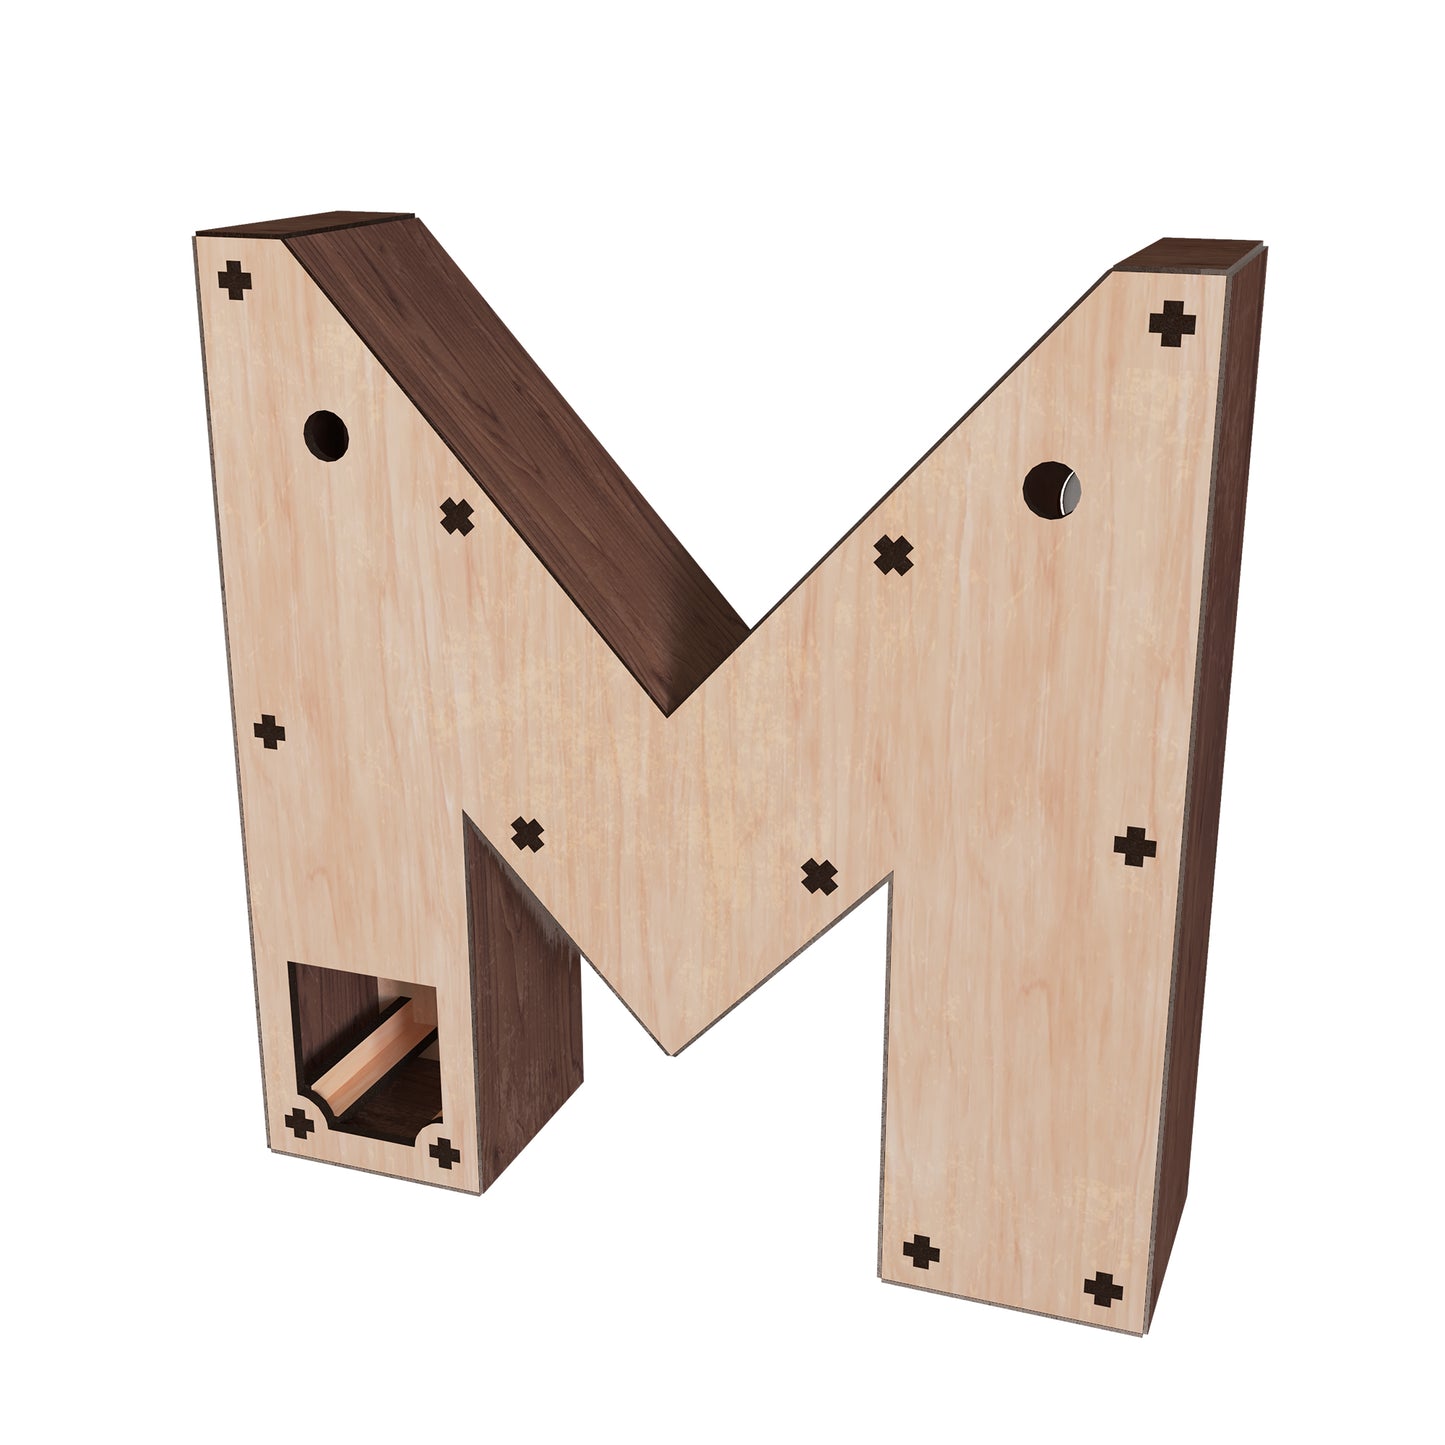 Light-up Marquee Letter Display "M"